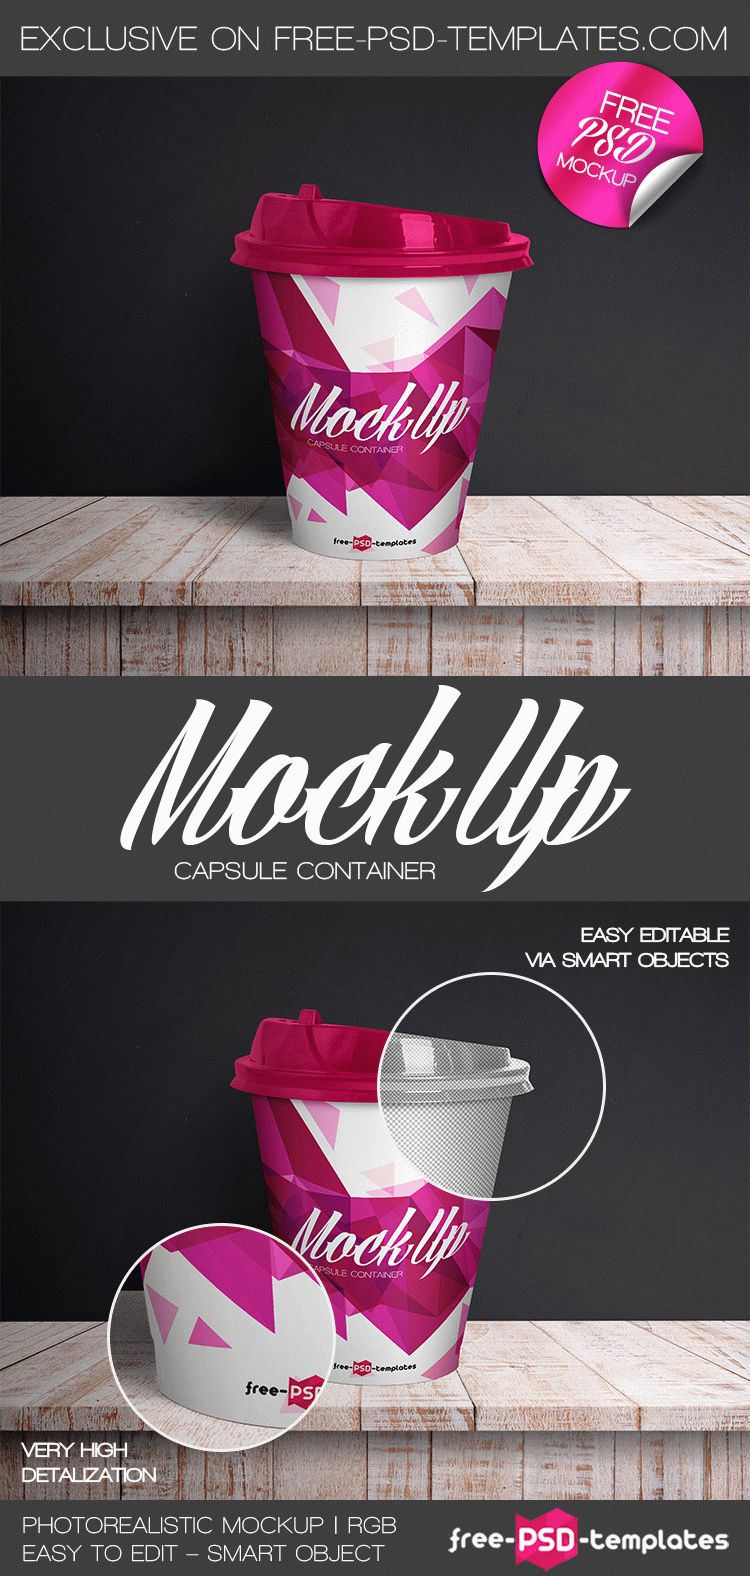 Download Free Capsule Container Mock-up in PSD | Free PSD Templates